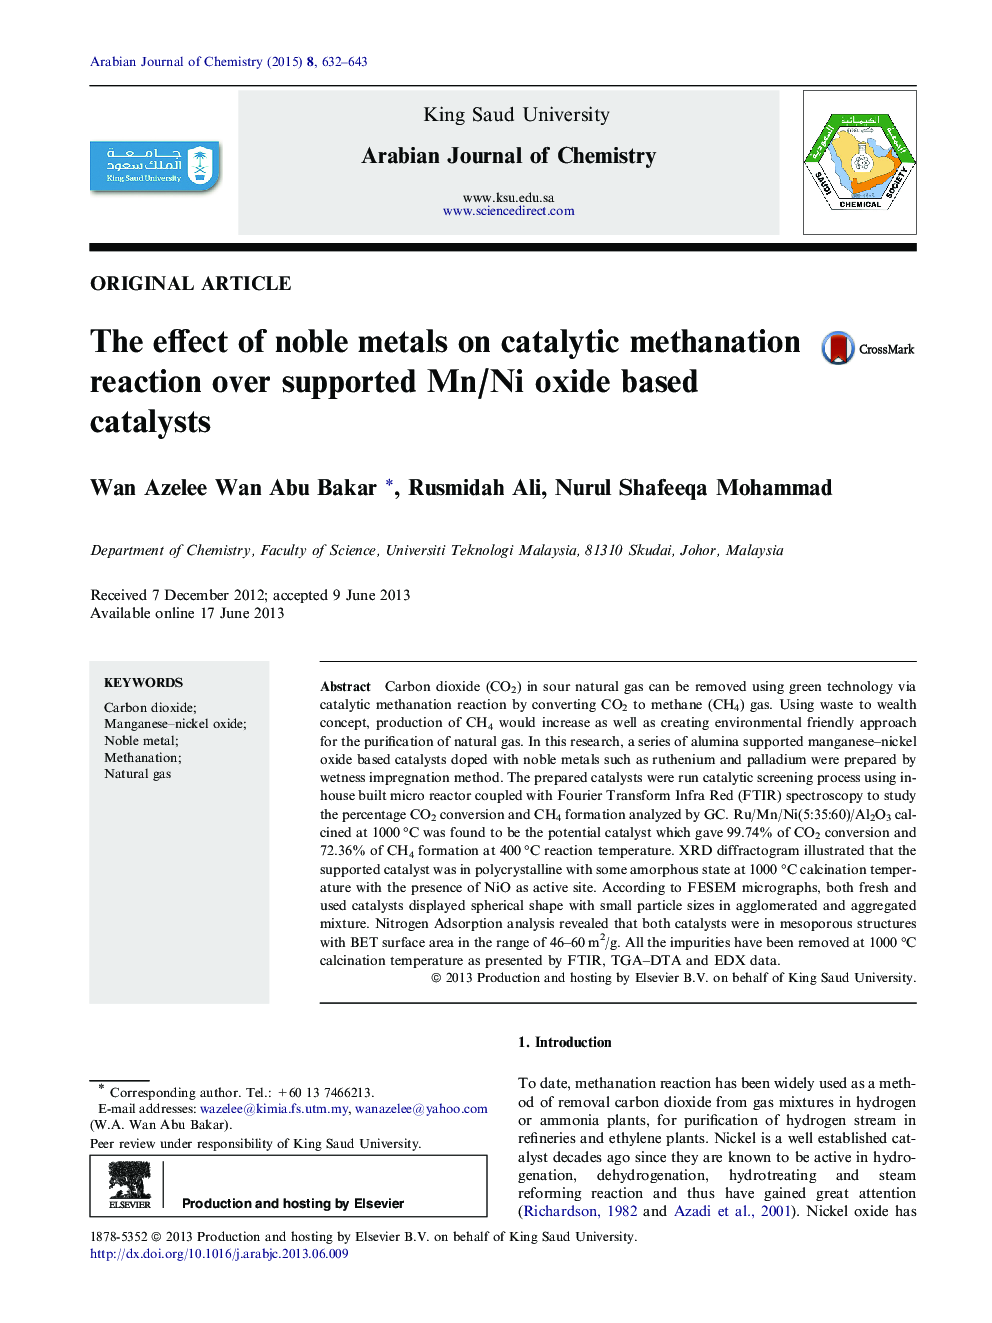 The effect of noble metals on catalytic methanation reaction over supported Mn/Ni oxide based catalysts 